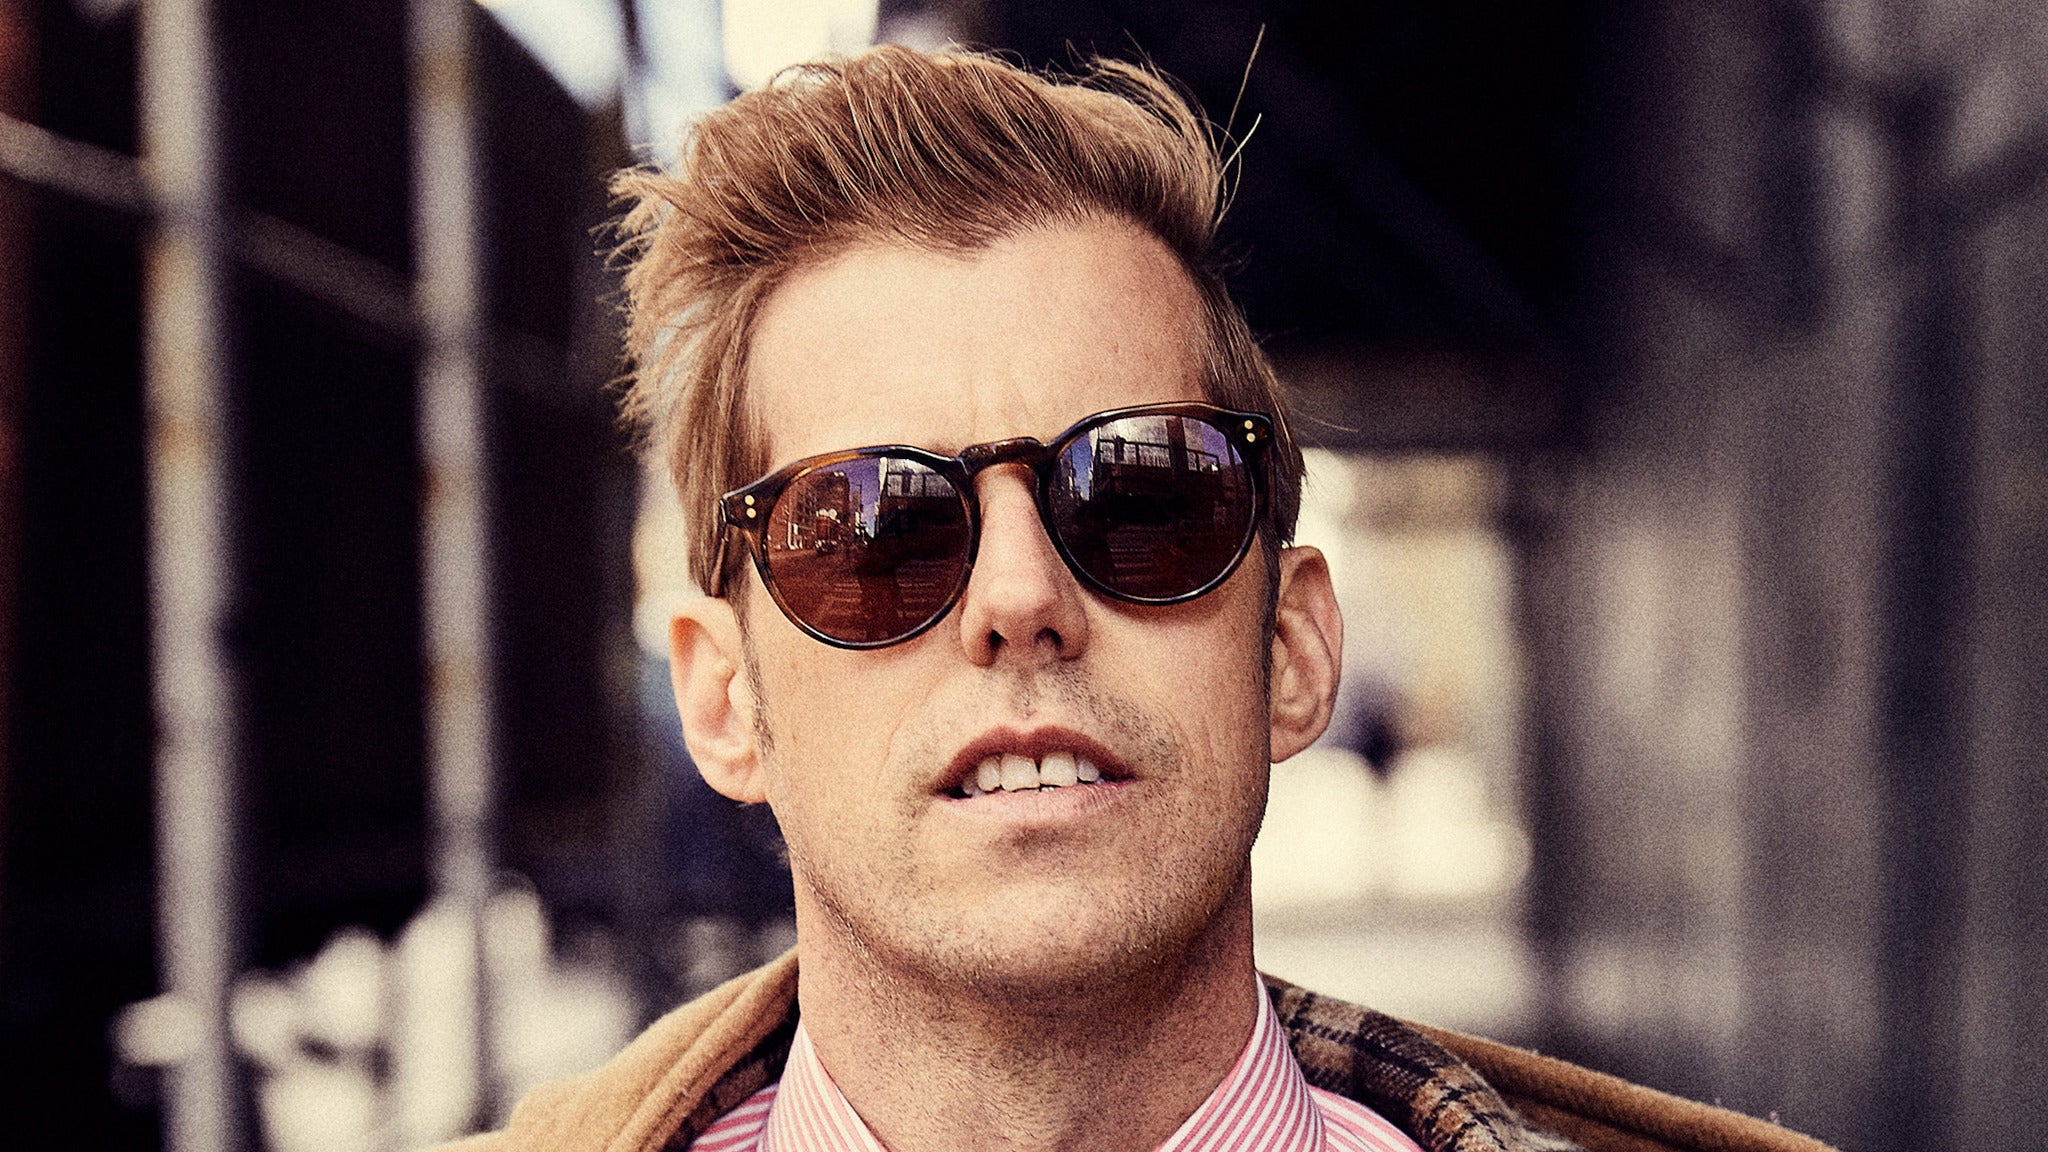 Andrew McMahon: The Three Pianos Tour pre-sale password for early tickets in Las Vegas